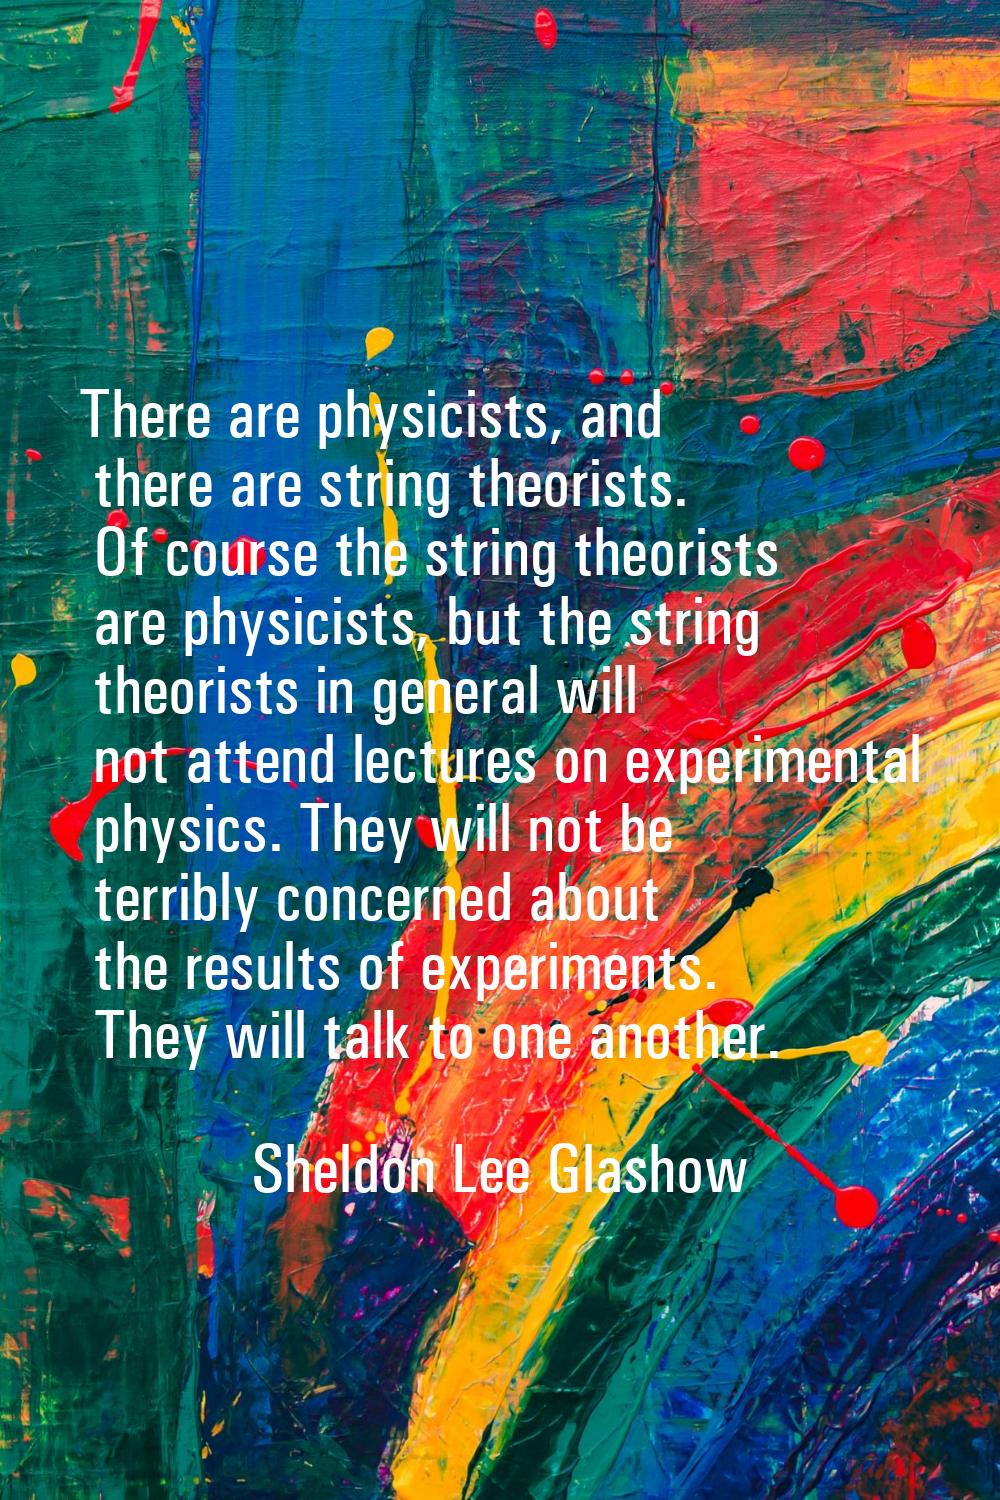 There are physicists, and there are string theorists. Of course the string theorists are physicists